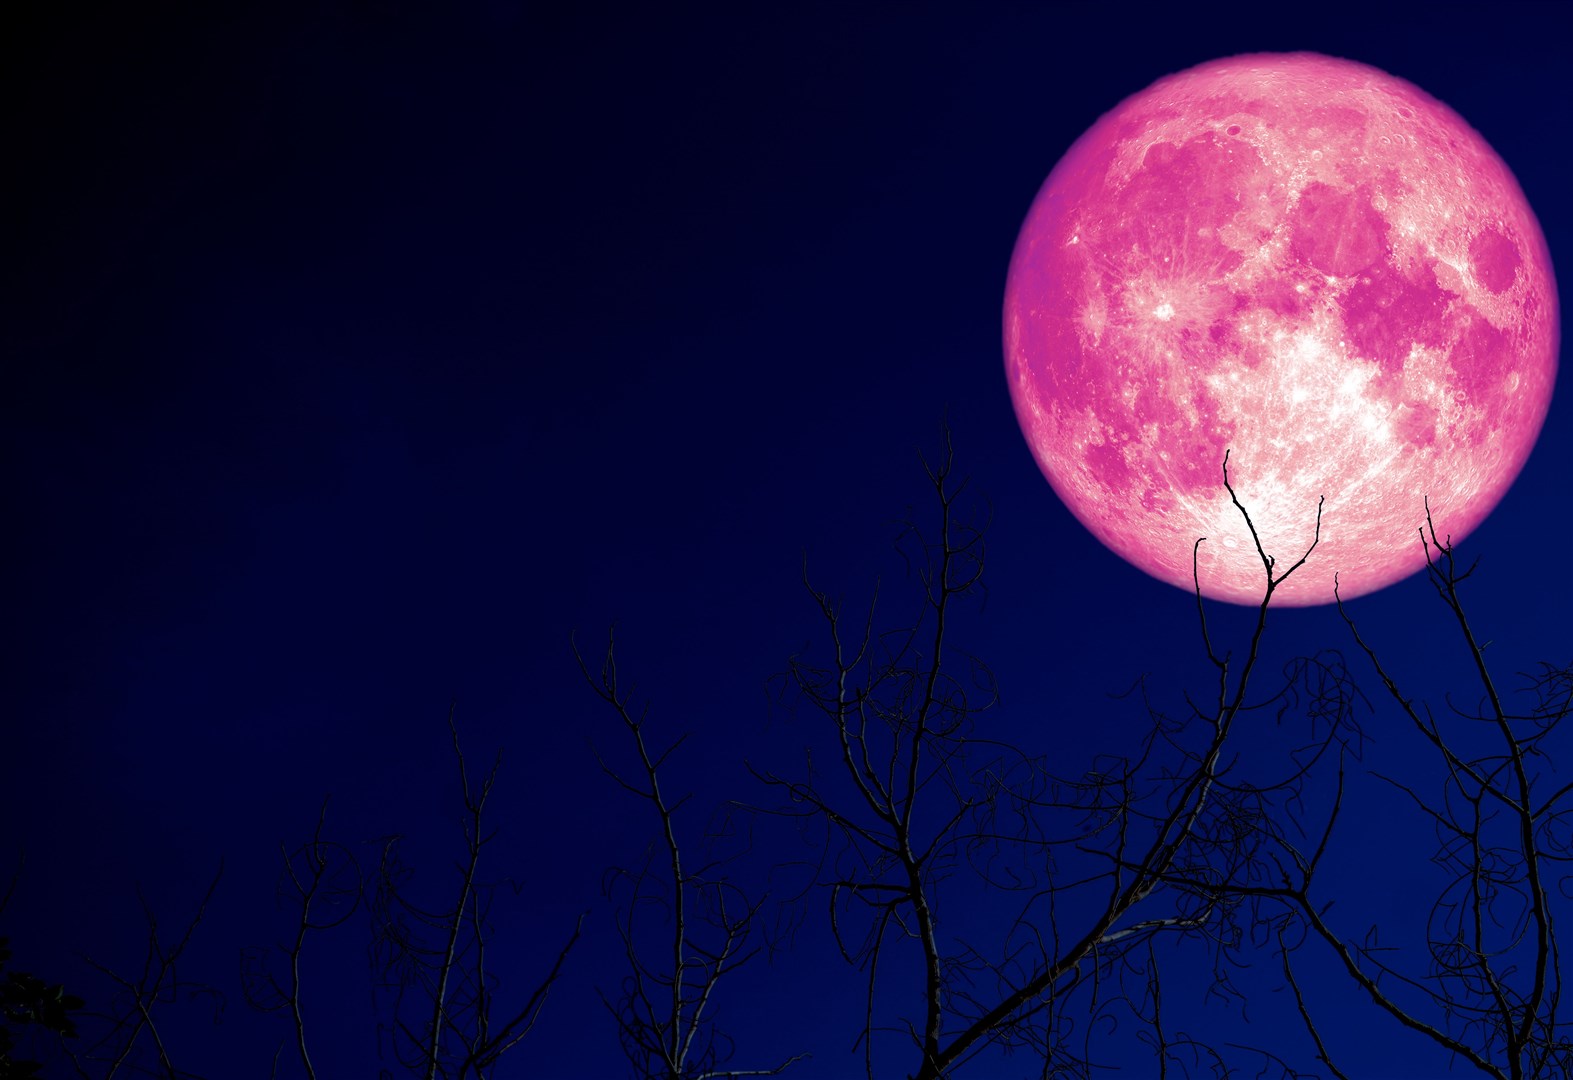 Strawberry Moon will be on show from 8pm tonight